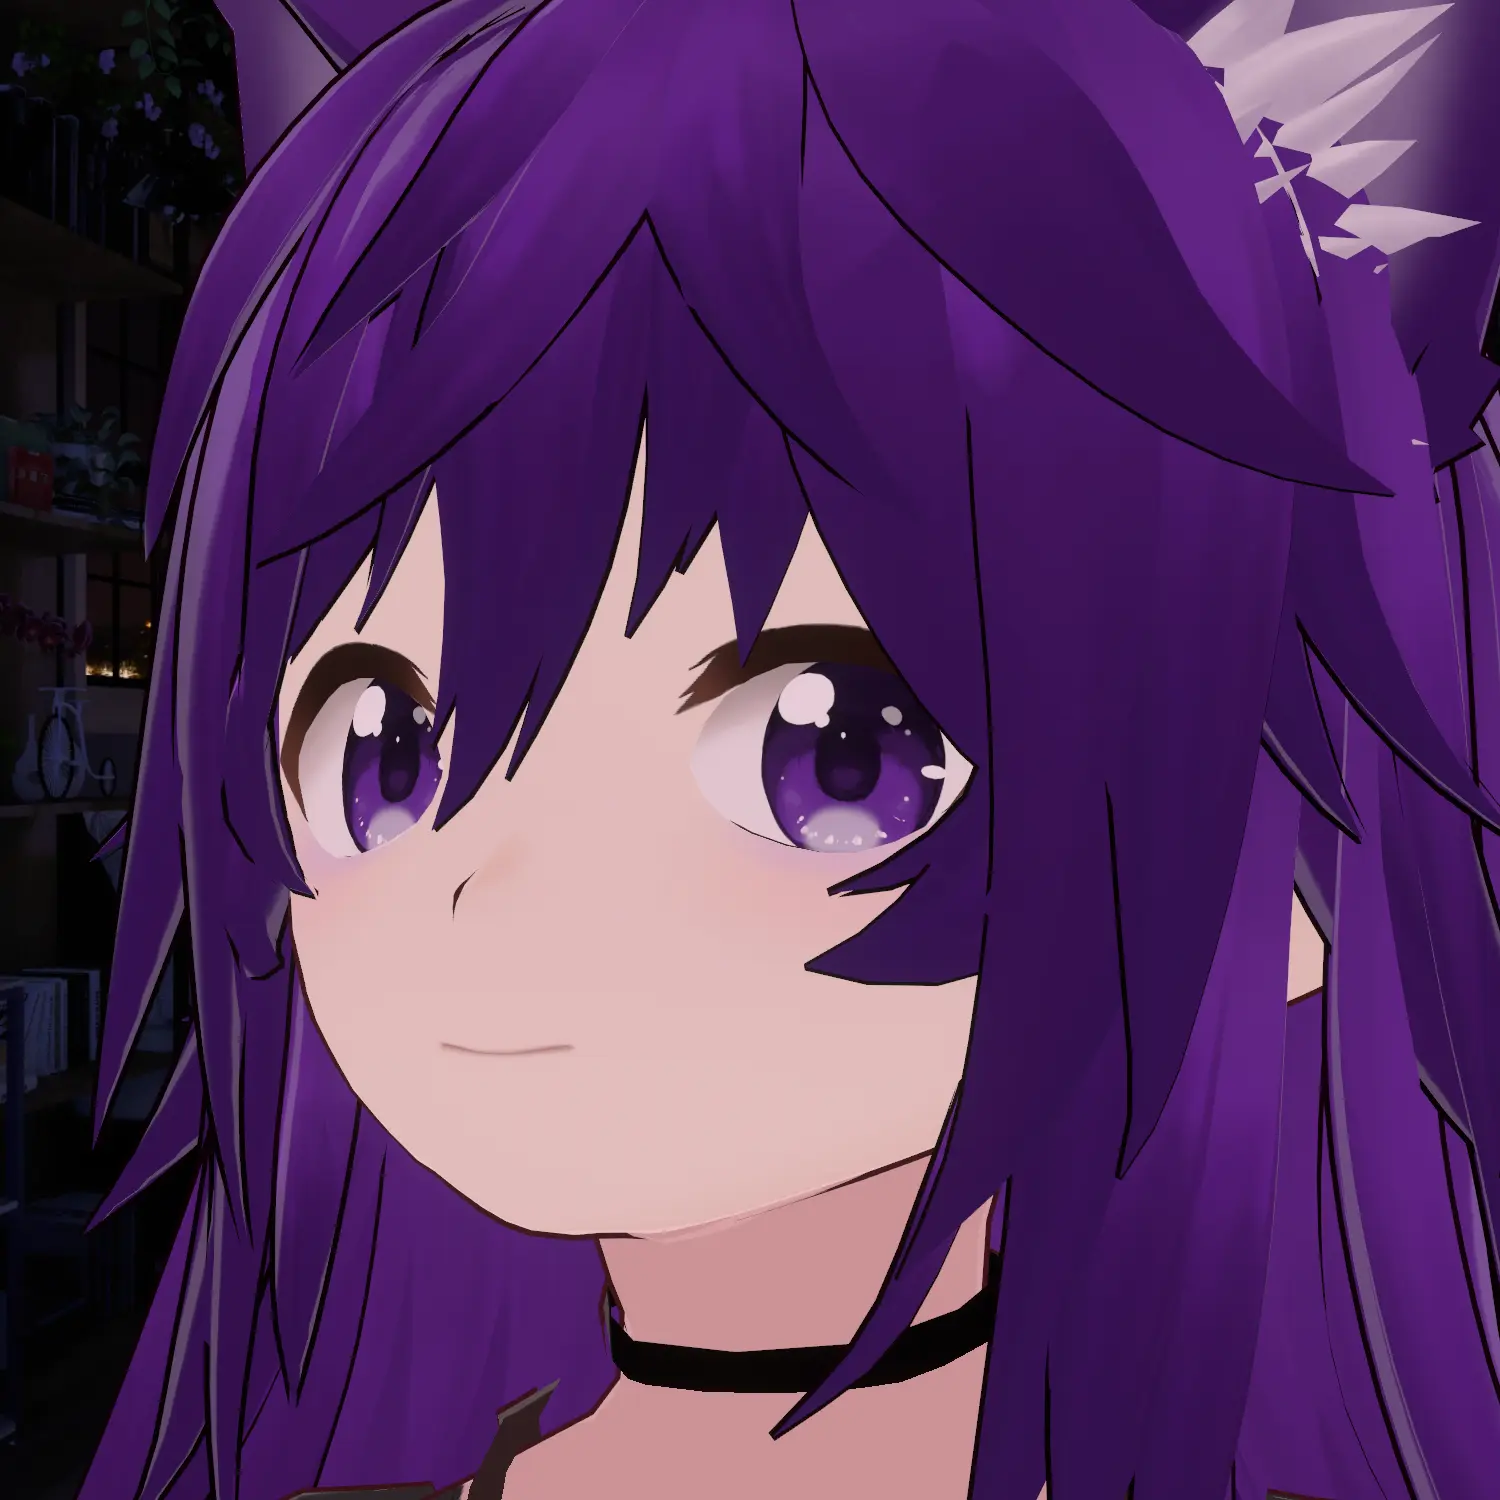 April's profile picture, depicting her v-tuber character, a catgirl with purple hair